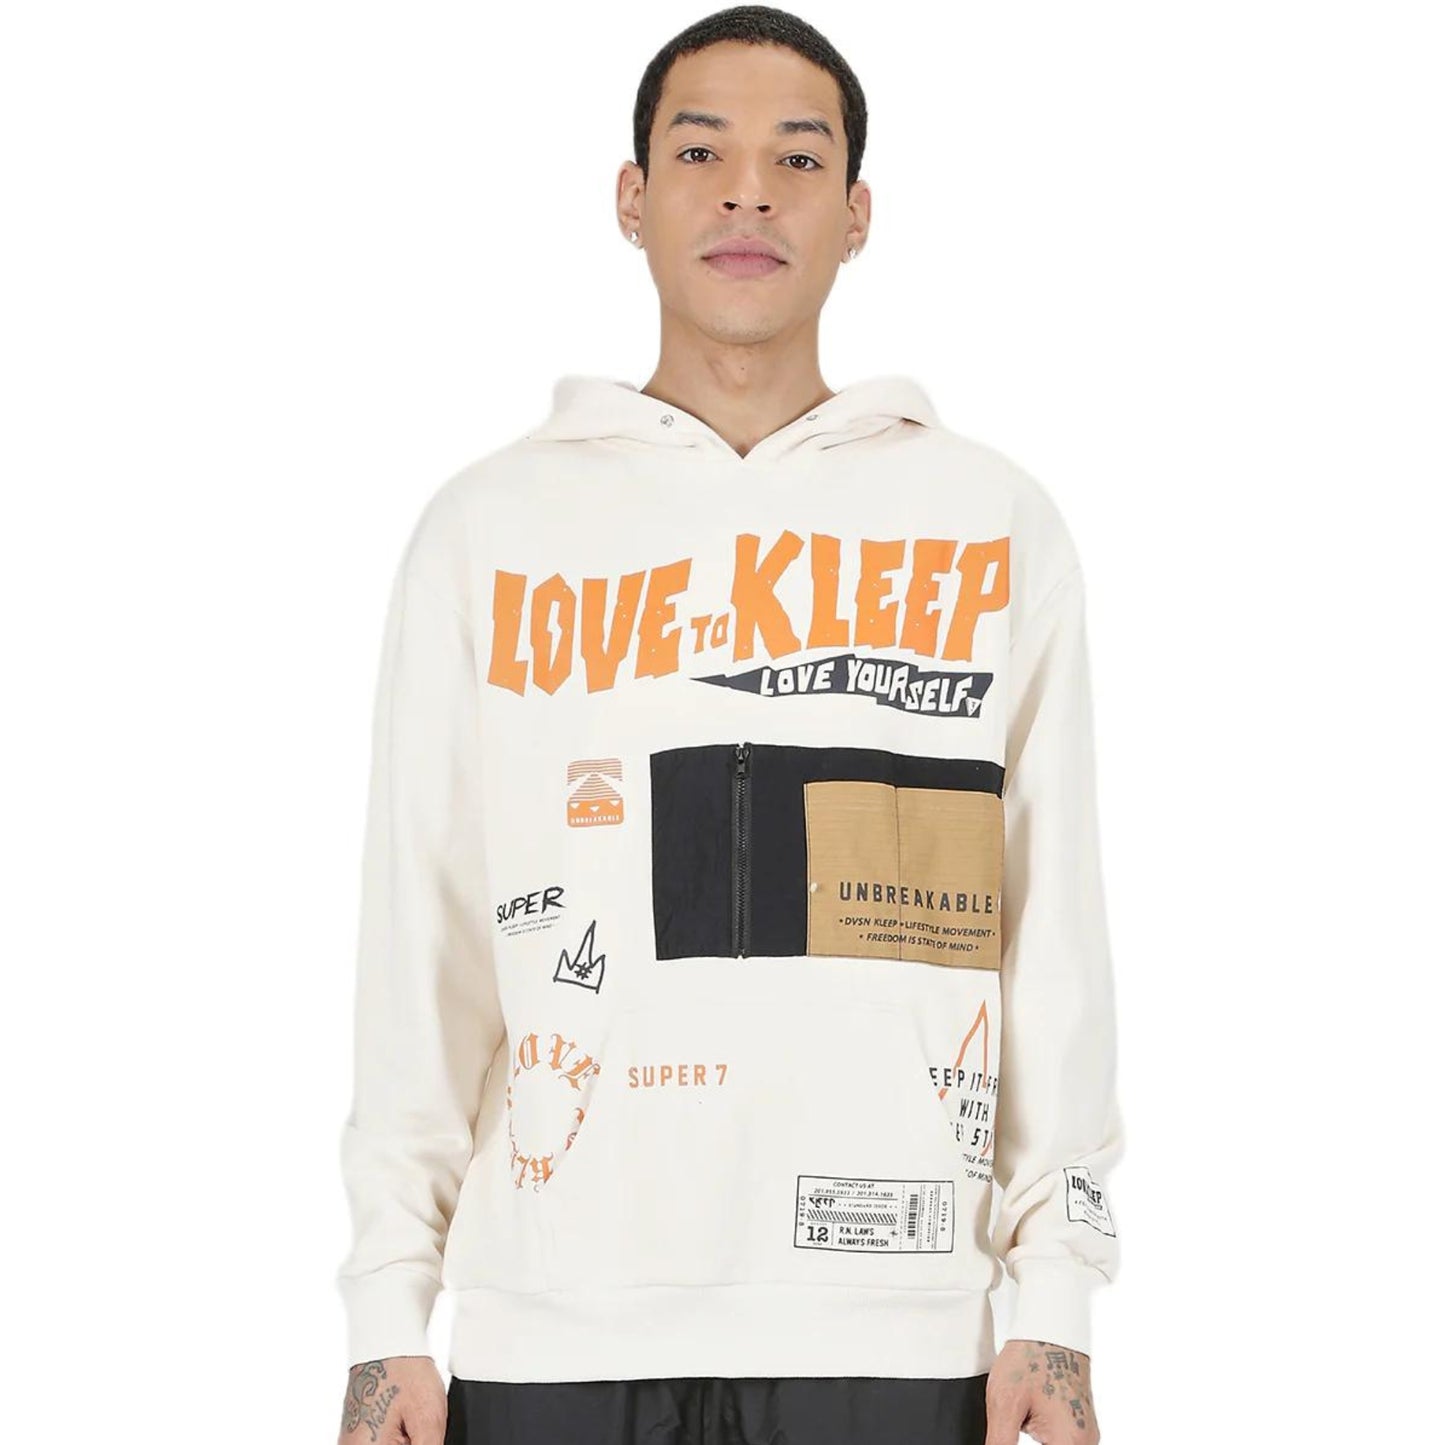 KLEEP Mortis Men's Premium French Terry Graphic Pullover Hoodie